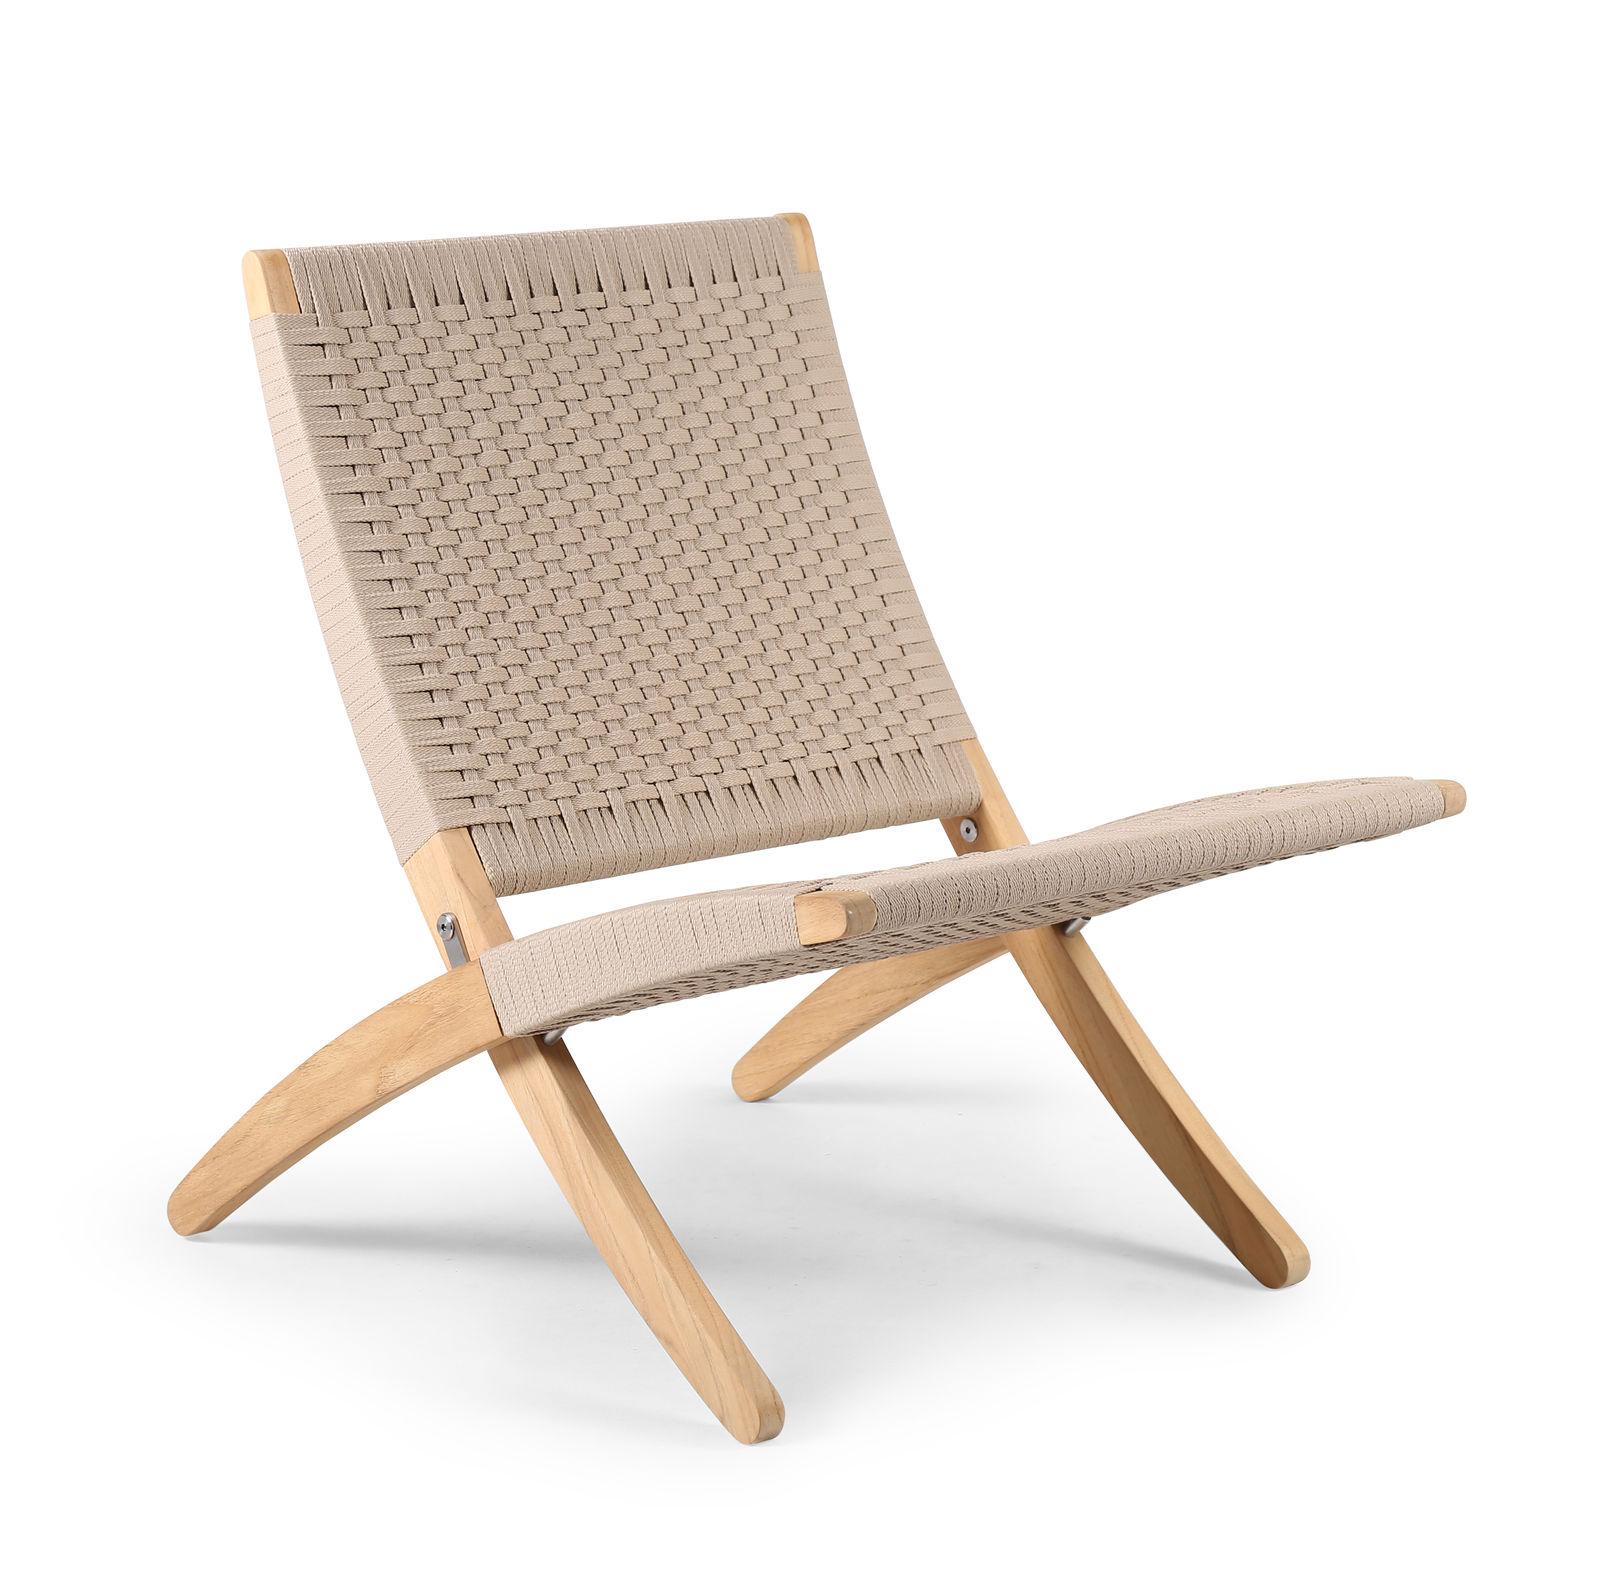 Designed by Morten Gøttler in 1997, the MG501 Cuba Chair captures contemporary design with its ideal balance of form and function, and nods to previous masters who experimented with elevating the folding chair concept.